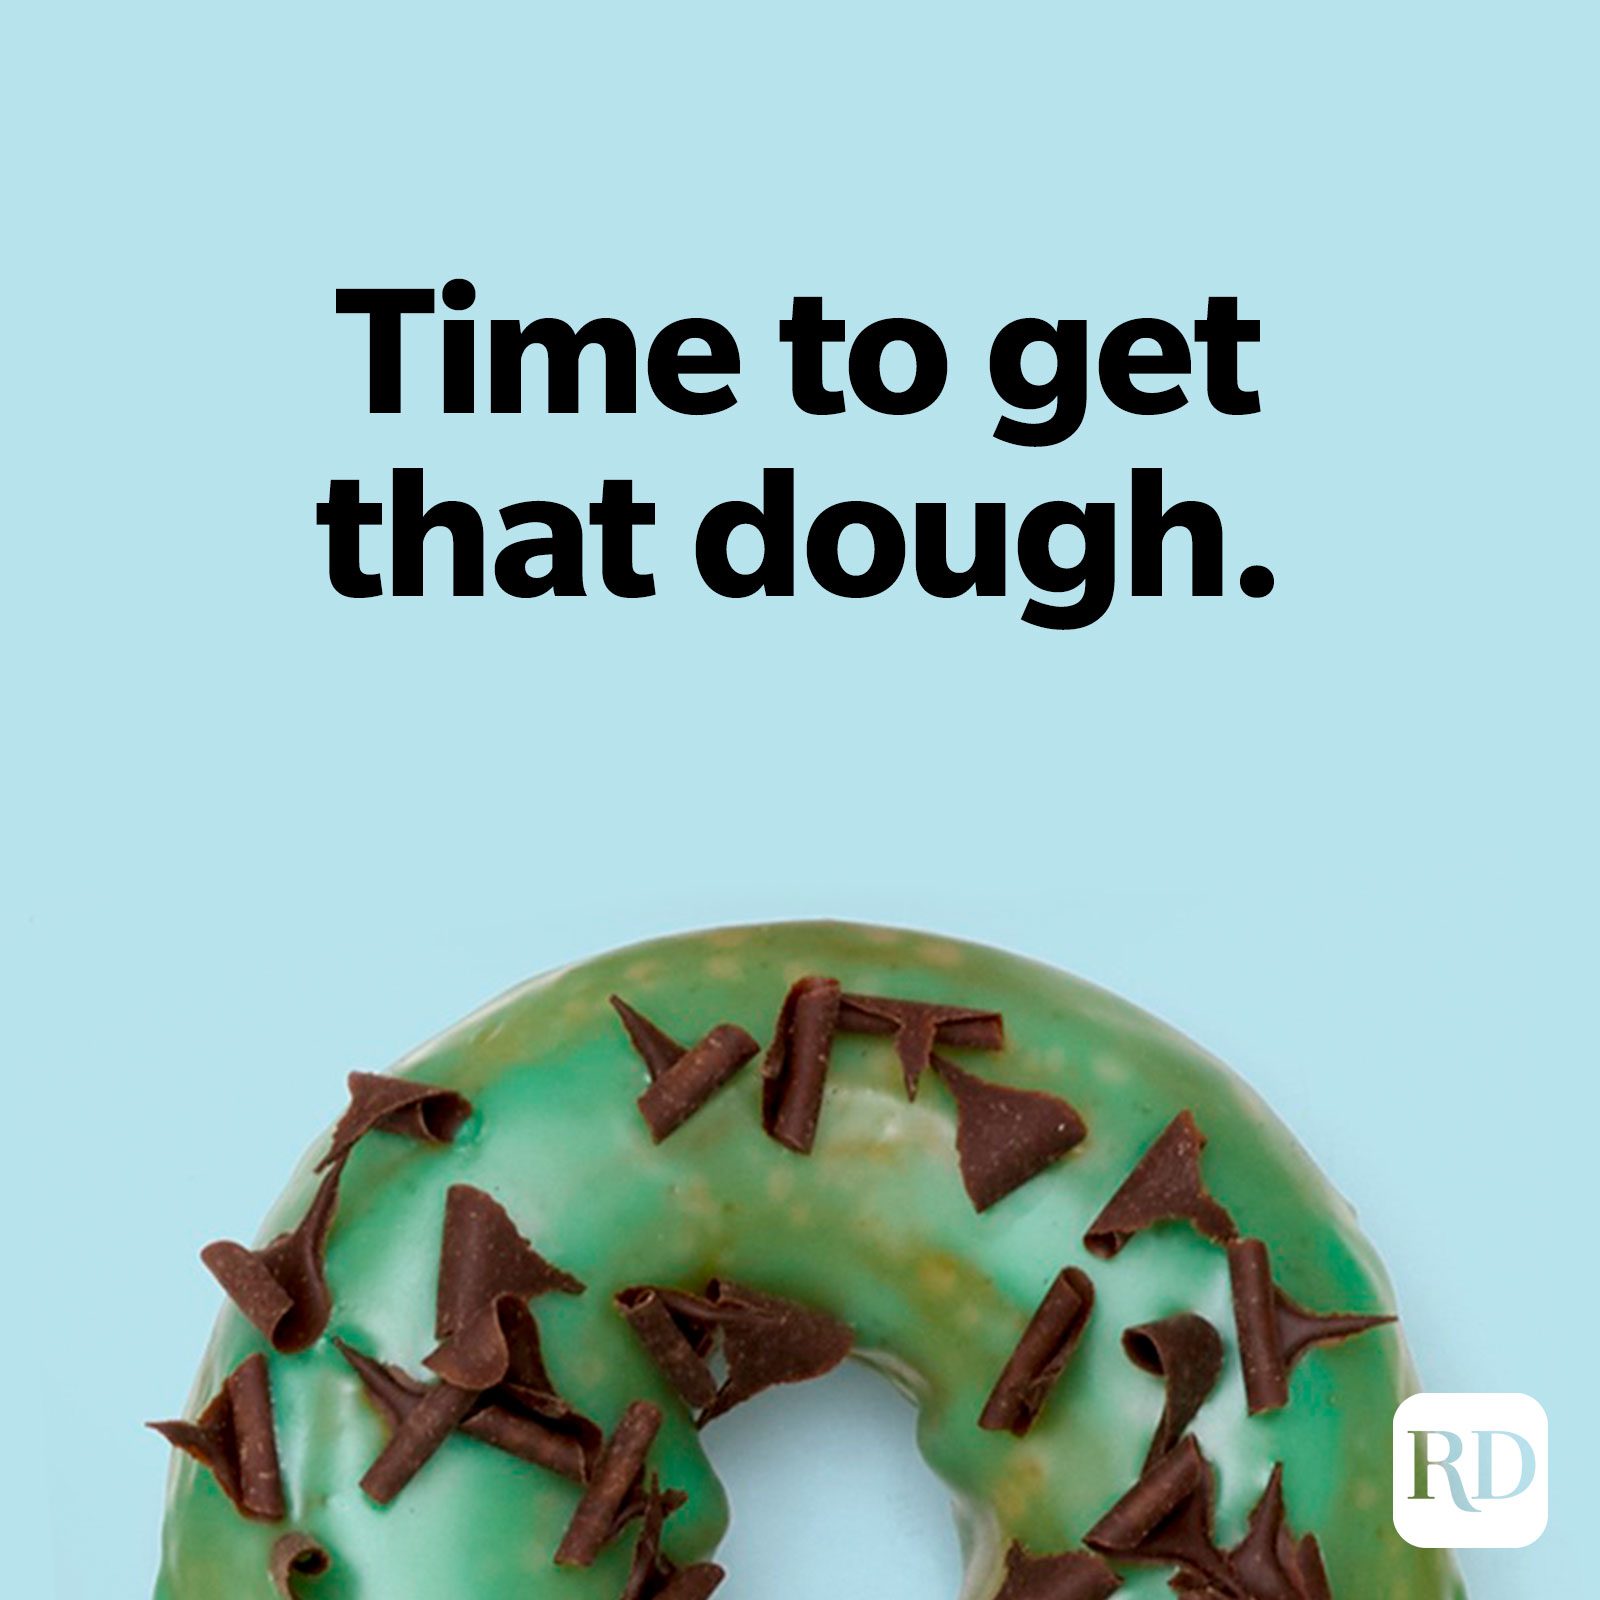 30 Donut Puns That Are Just A-Dough-Rable | Reader's Digest